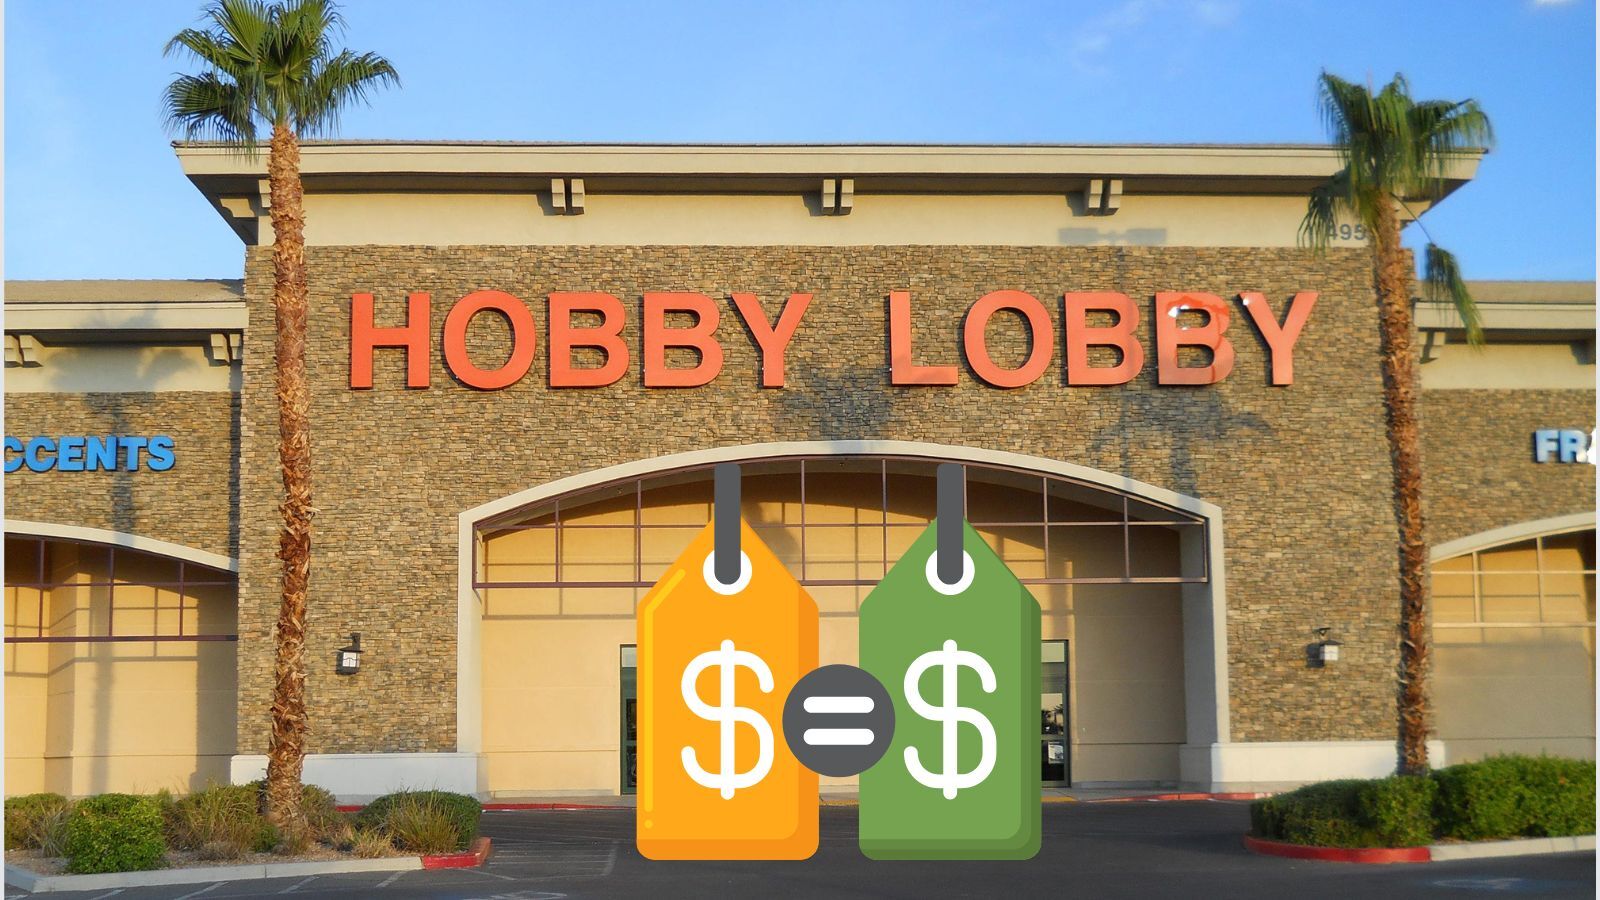 Does Hobby Lobby Price Match? (It's Not That Simple!)